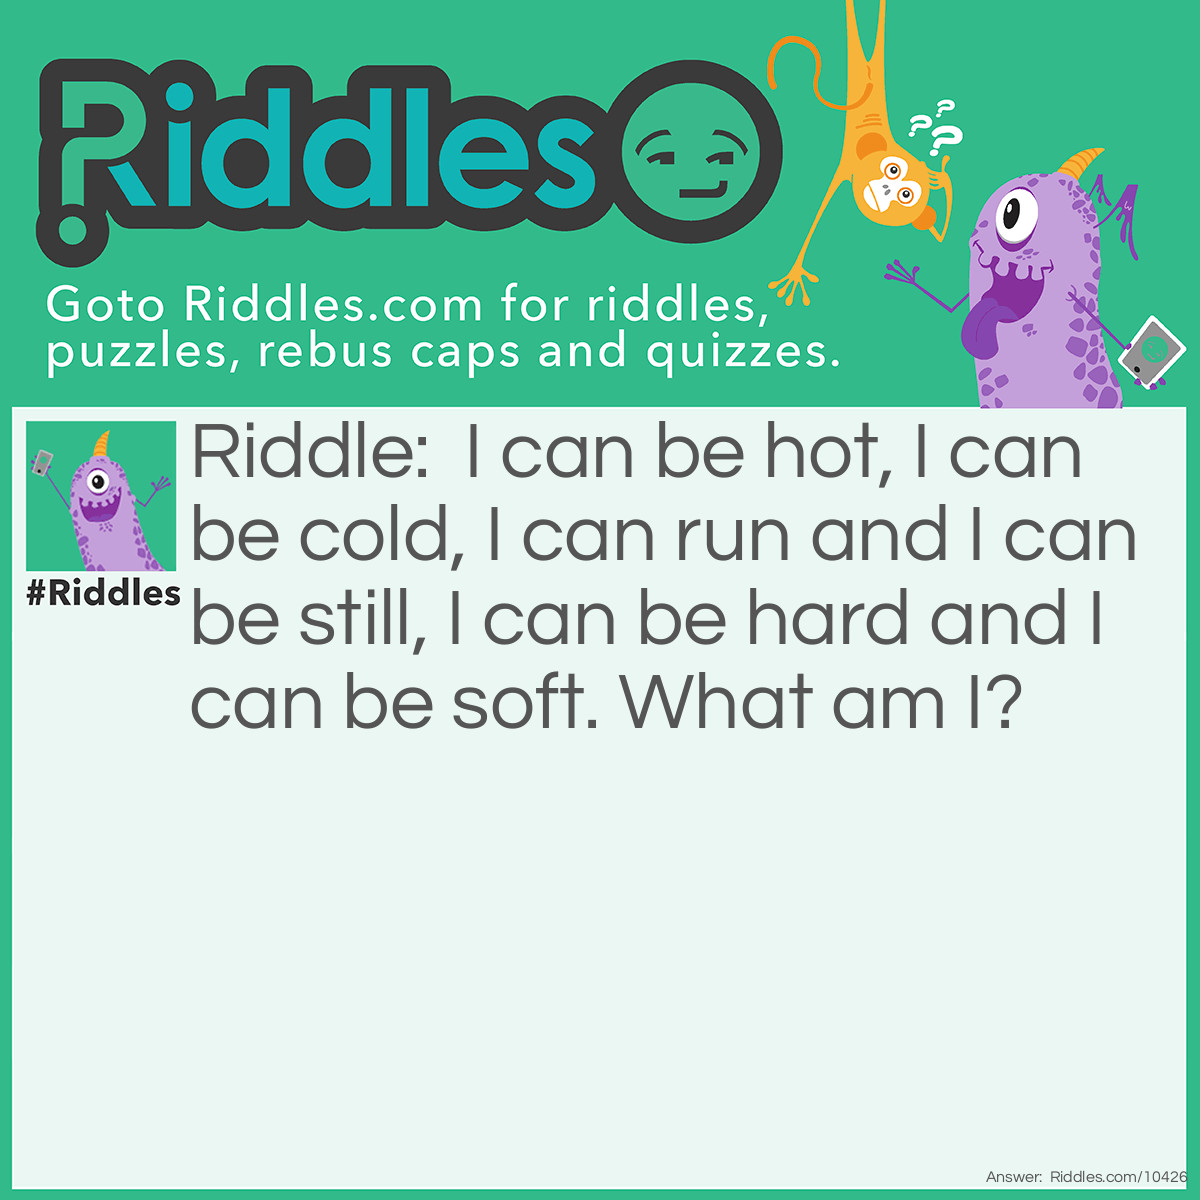 Riddle: I can be hot, I can be cold, I can run and I can be still, I can be hard and I can be soft. What am I? Answer: Water.